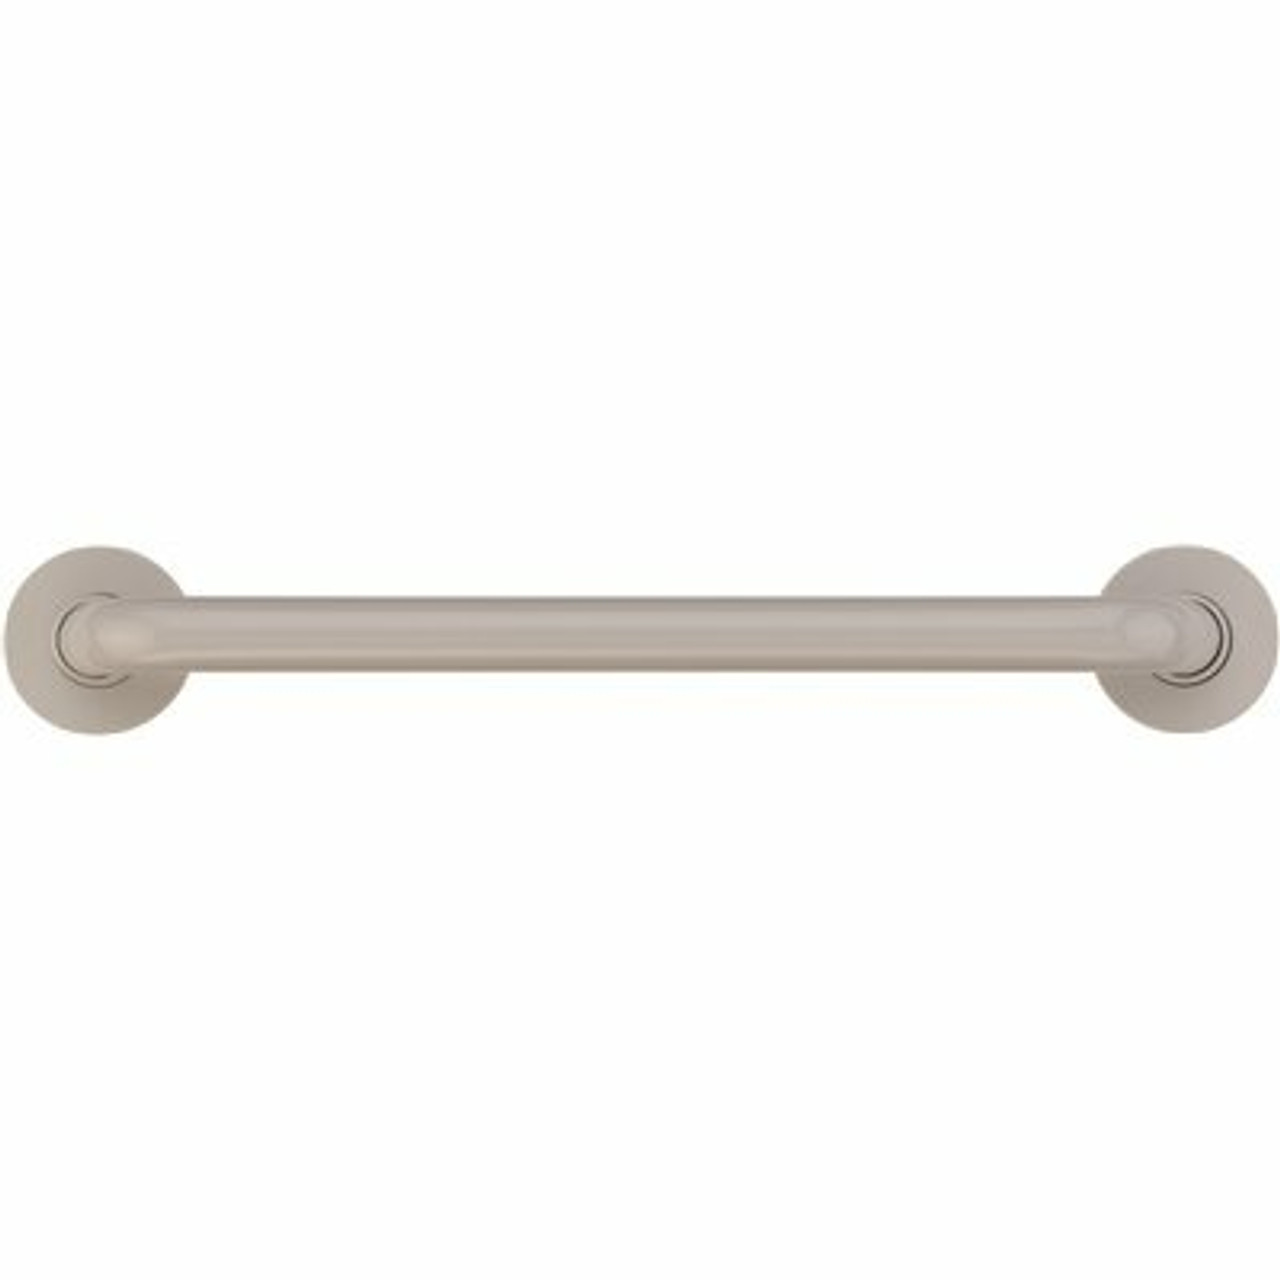 Ponte Giulio Usa 30 In. Contractor Antimicrobial Vinyl Coated Grab Bar In Light Gray